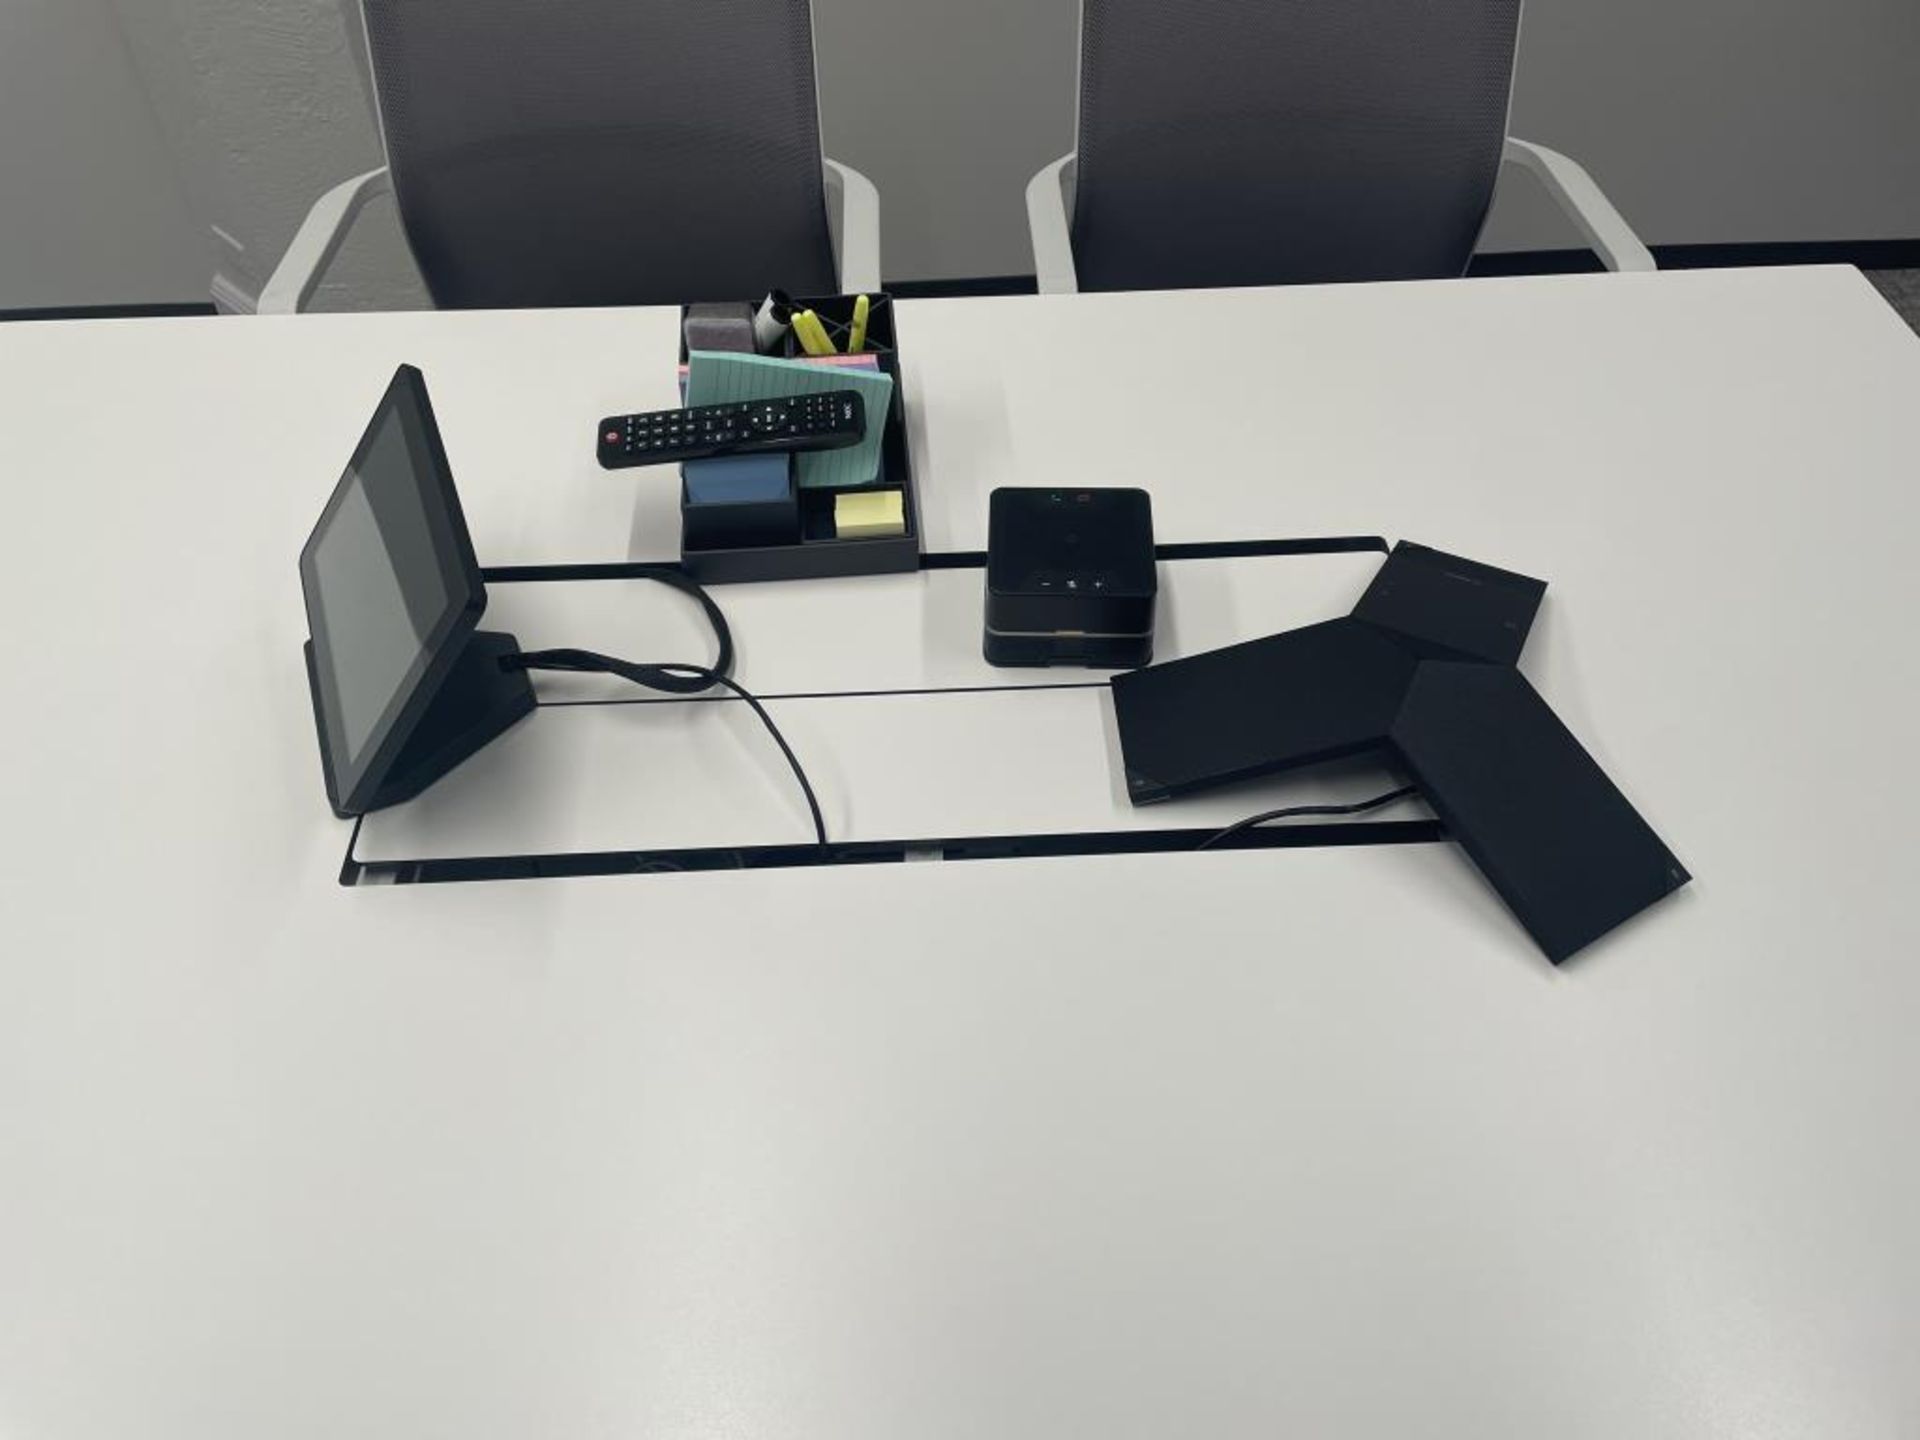 Video Conferencing w/ Table & Chairs - Image 5 of 12